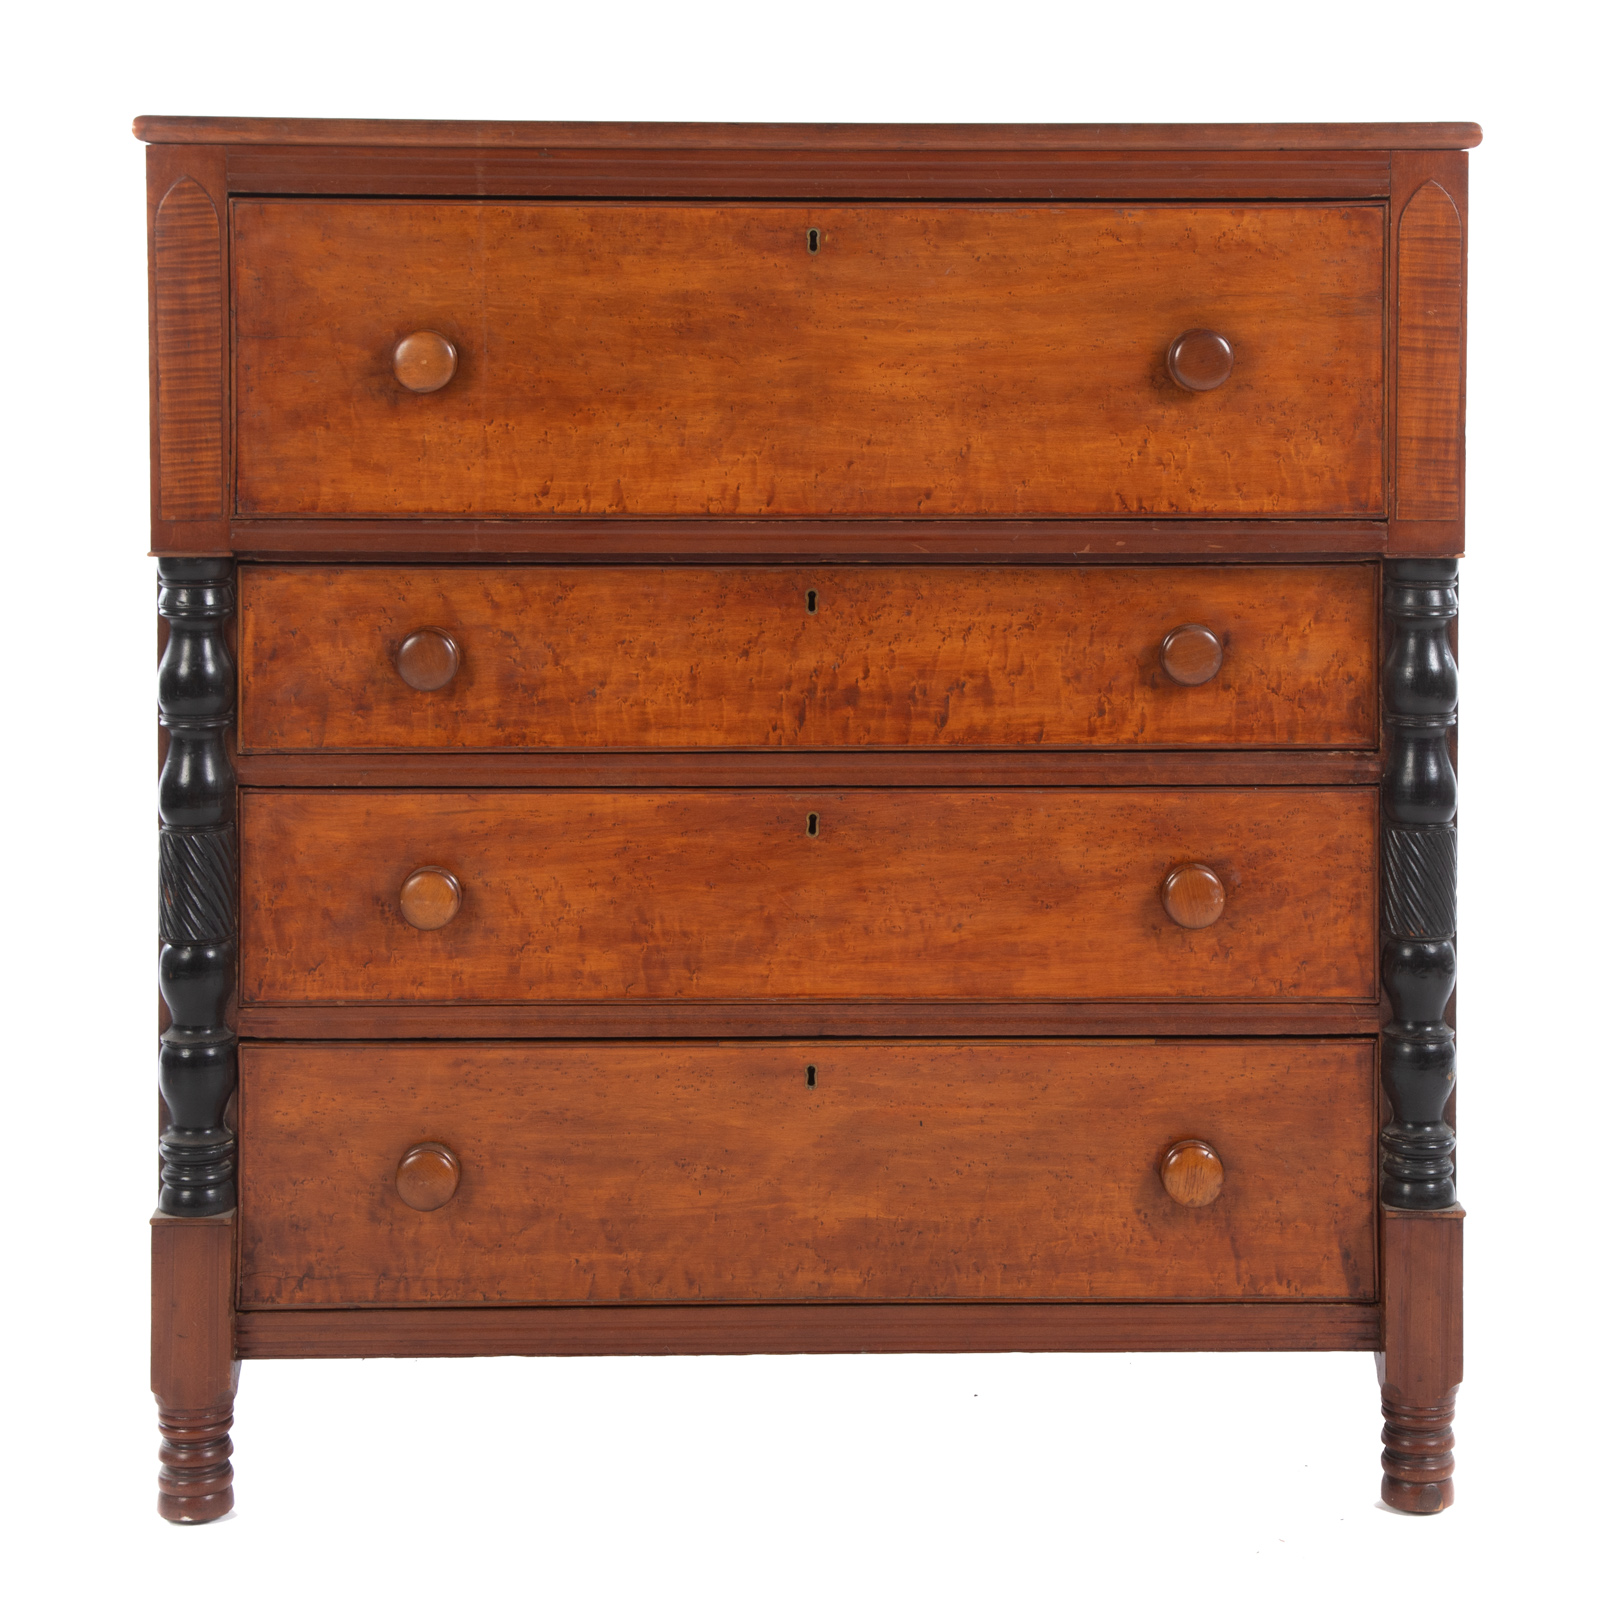 AMERICAN CLASSICAL MIXED WOOD CHEST